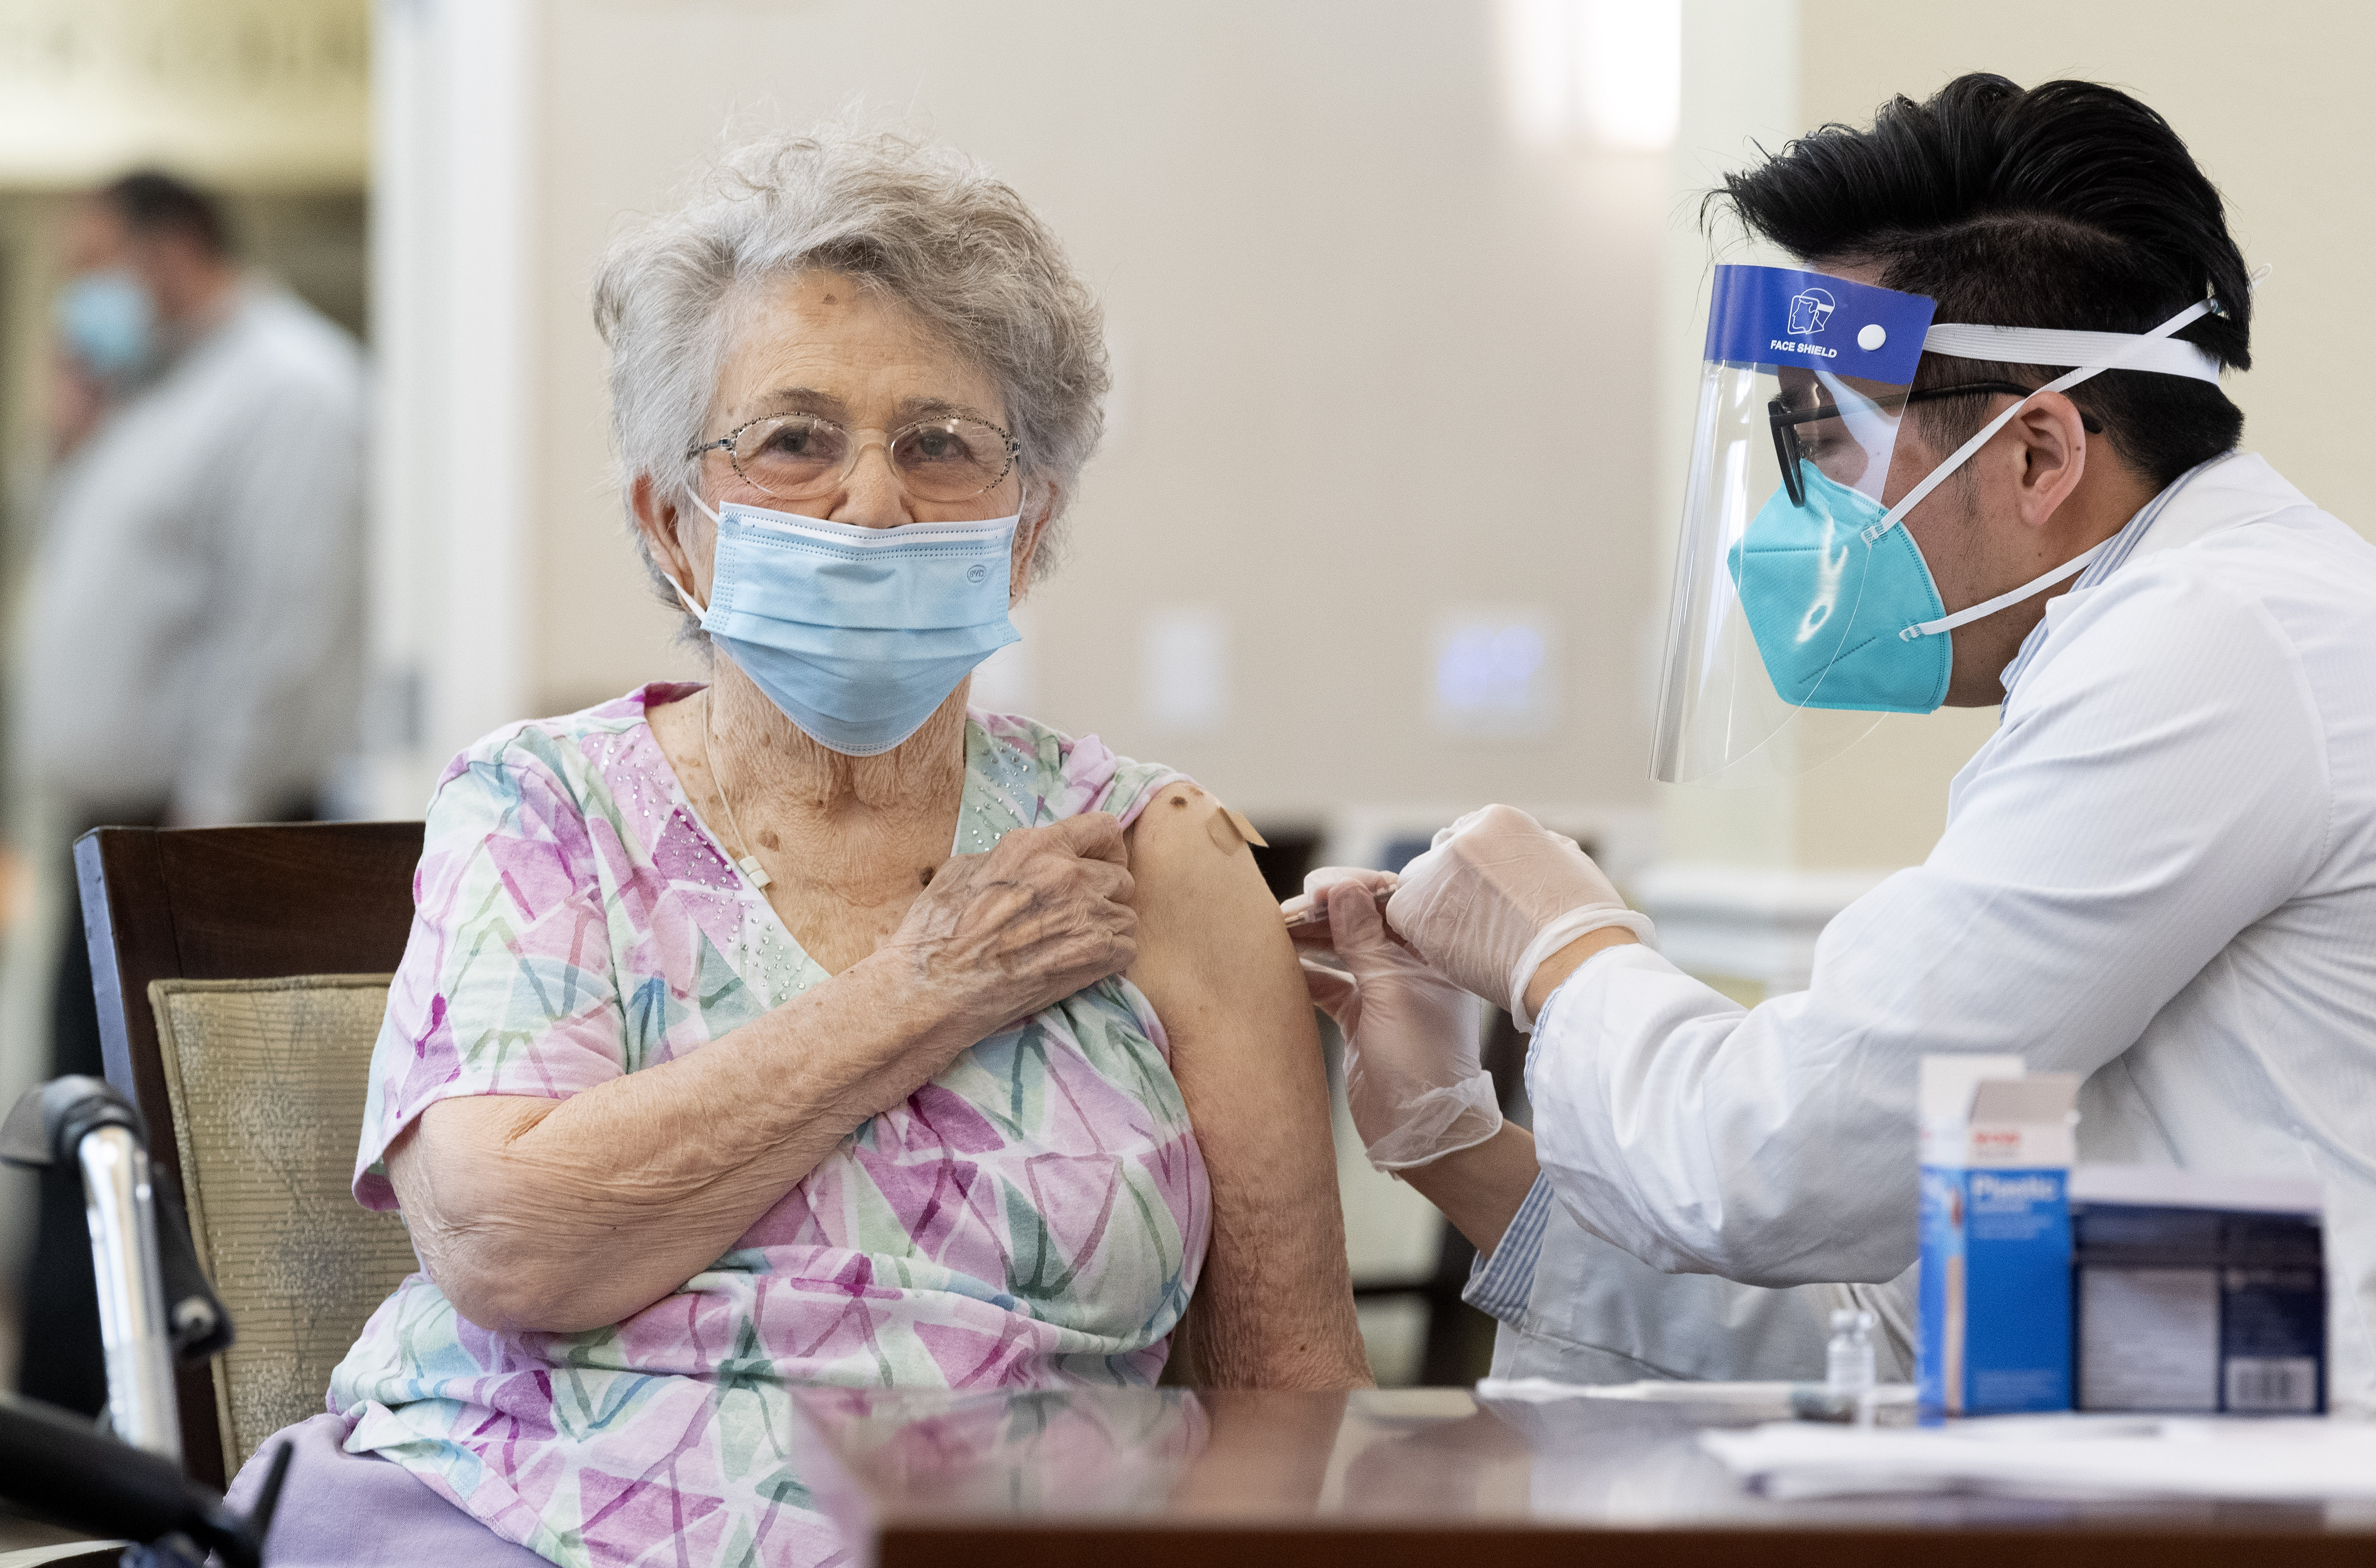 A CVS pharmacist gives the Pfizer/BioNTech COVID-19 vaccine to a resident at the Emerald Court senior living community in Anaheim, CA on Friday, January 8, 2021. The vaccine was optional for staff and residents.